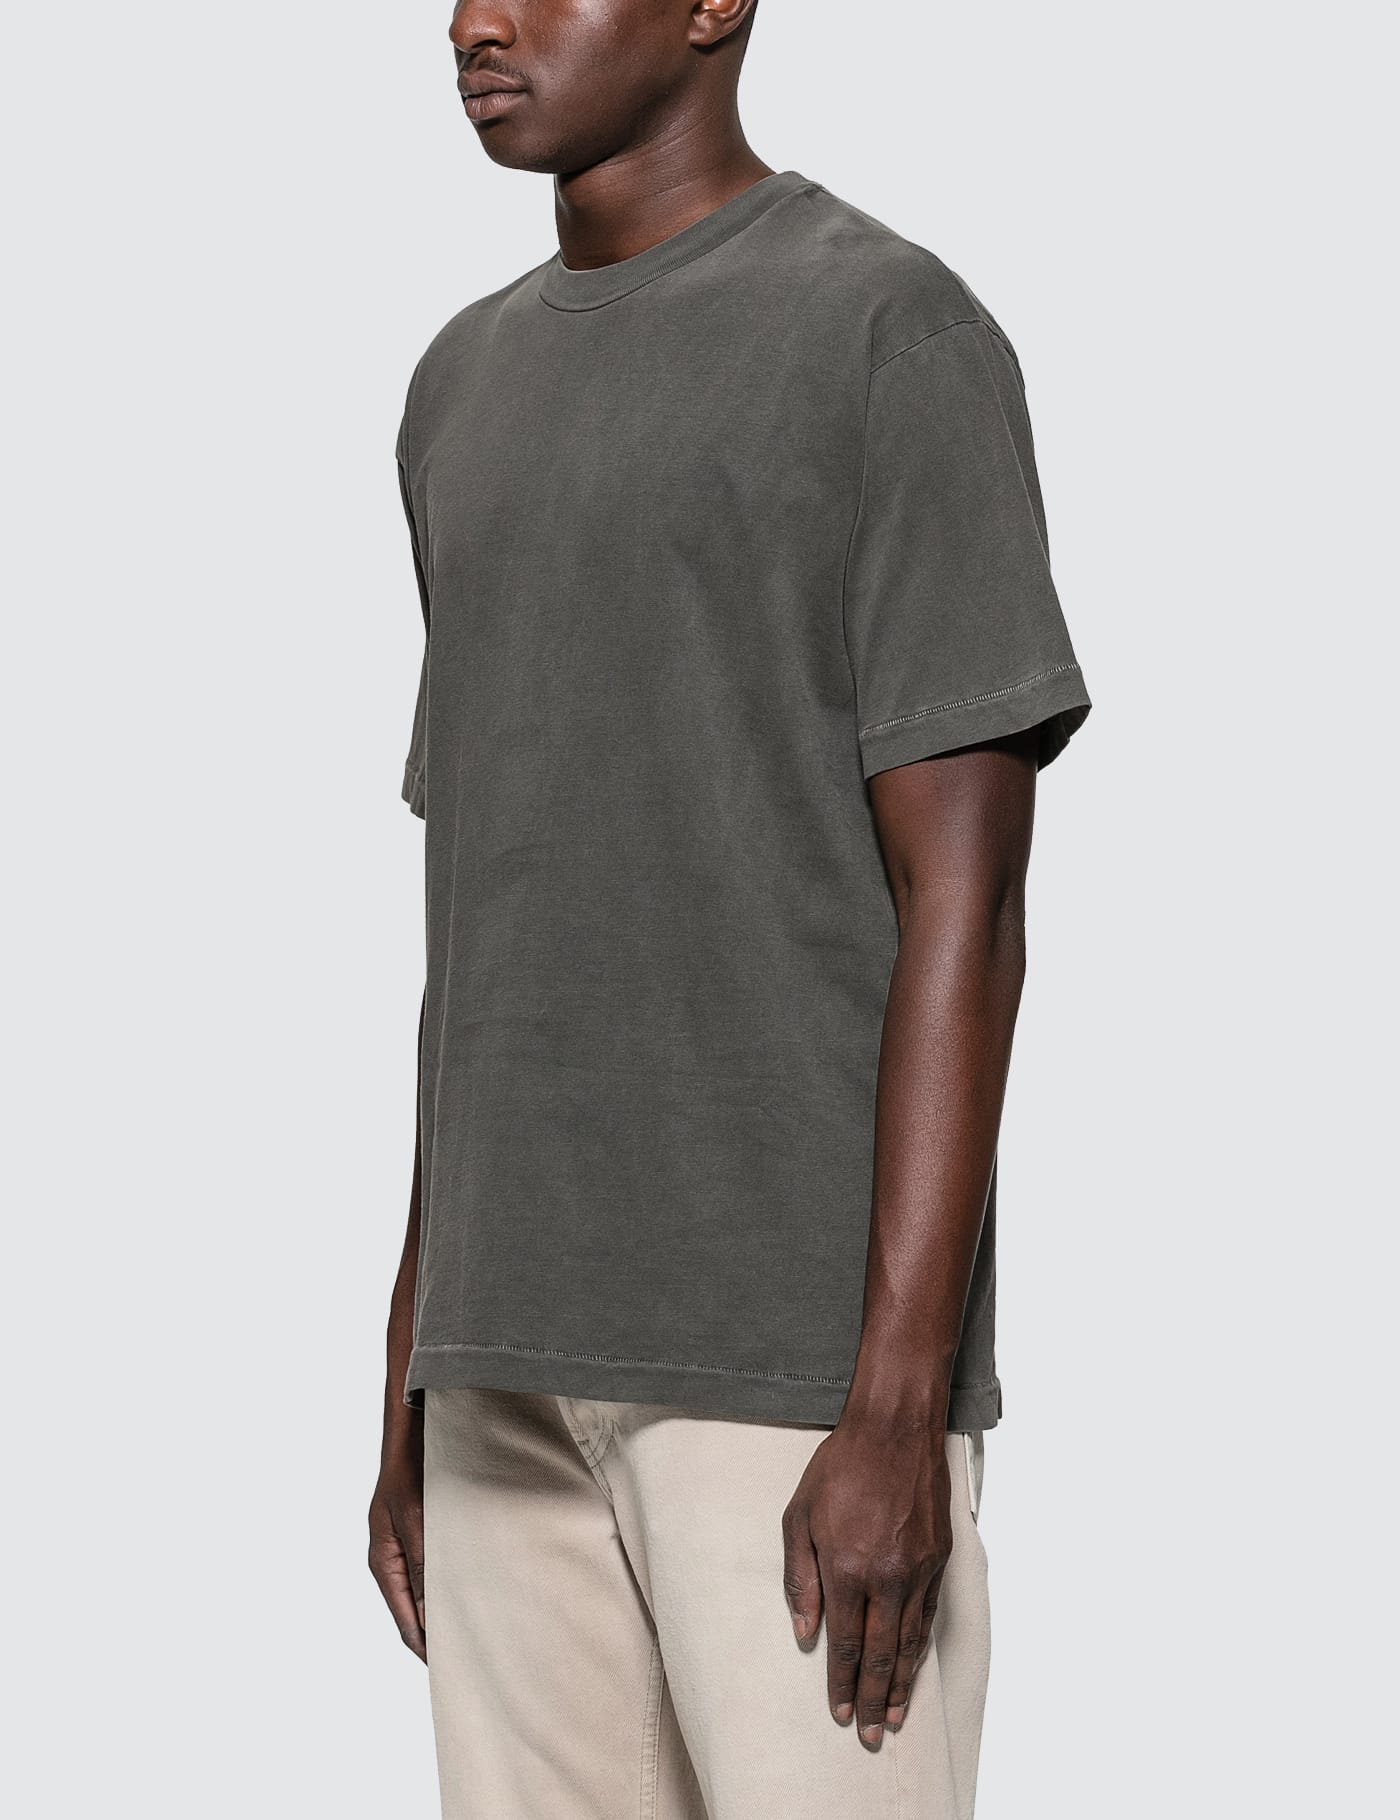 Yeezy Season 6 - Classic S/S T-Shirt | HBX - Globally Curated